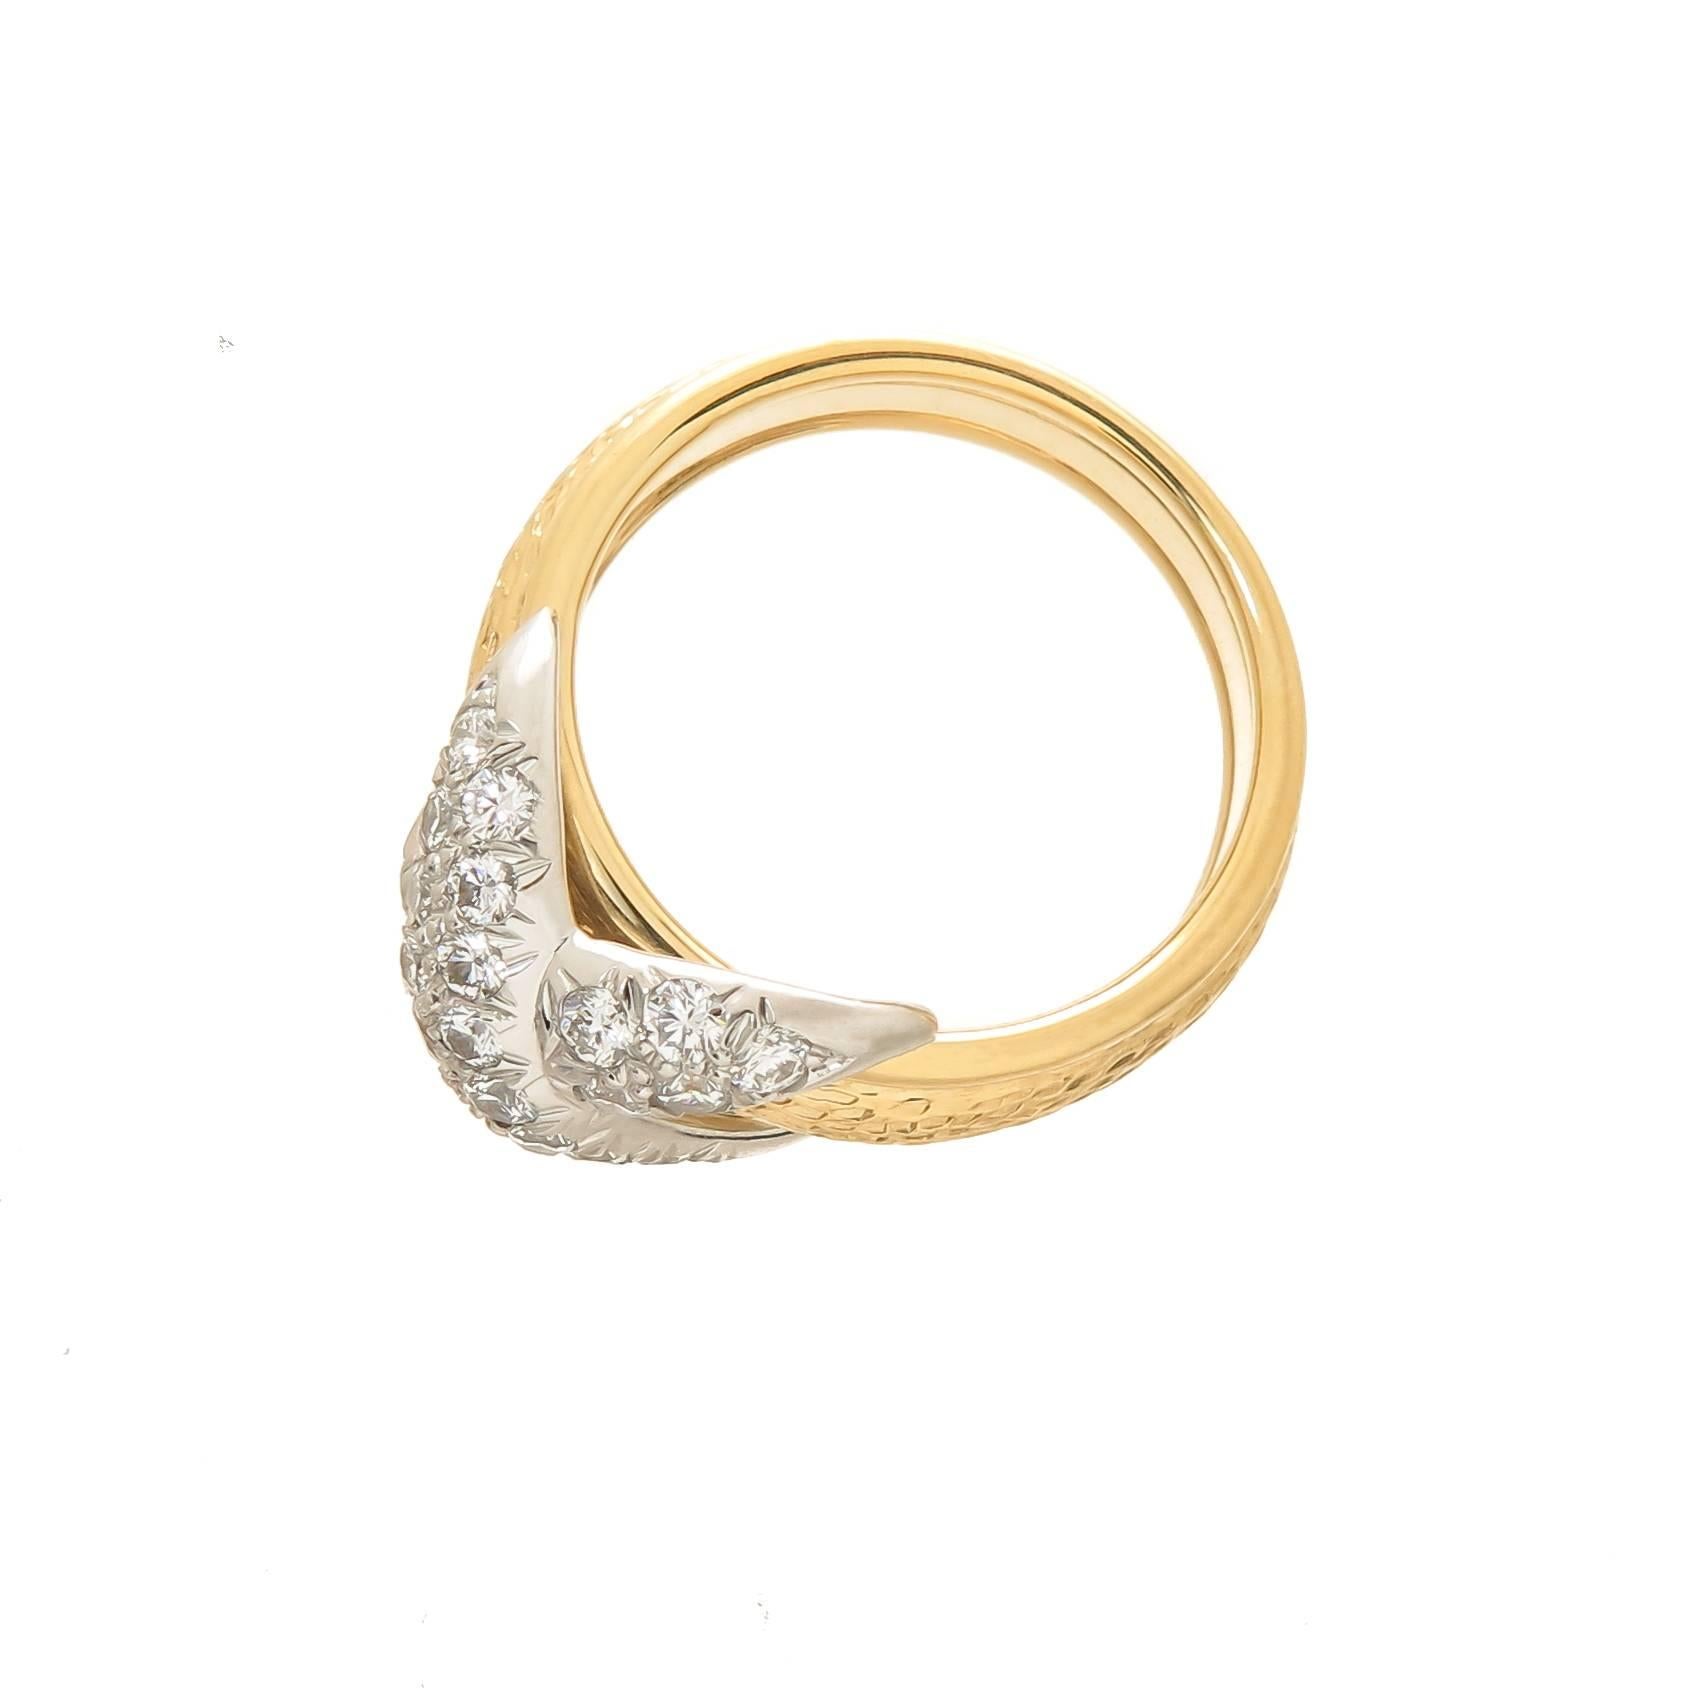 Circa 2000 18k Yellow Gold, Platinum and Diamond X Ring by Jean Schlumberger for Tiffany & Co. 28 Round Brilliant Cut Diamonds totaling approximately 1 carat and grading as VS1 clarity and F-G Color. The ring top measures 1/2 X 3/8 inch, finger